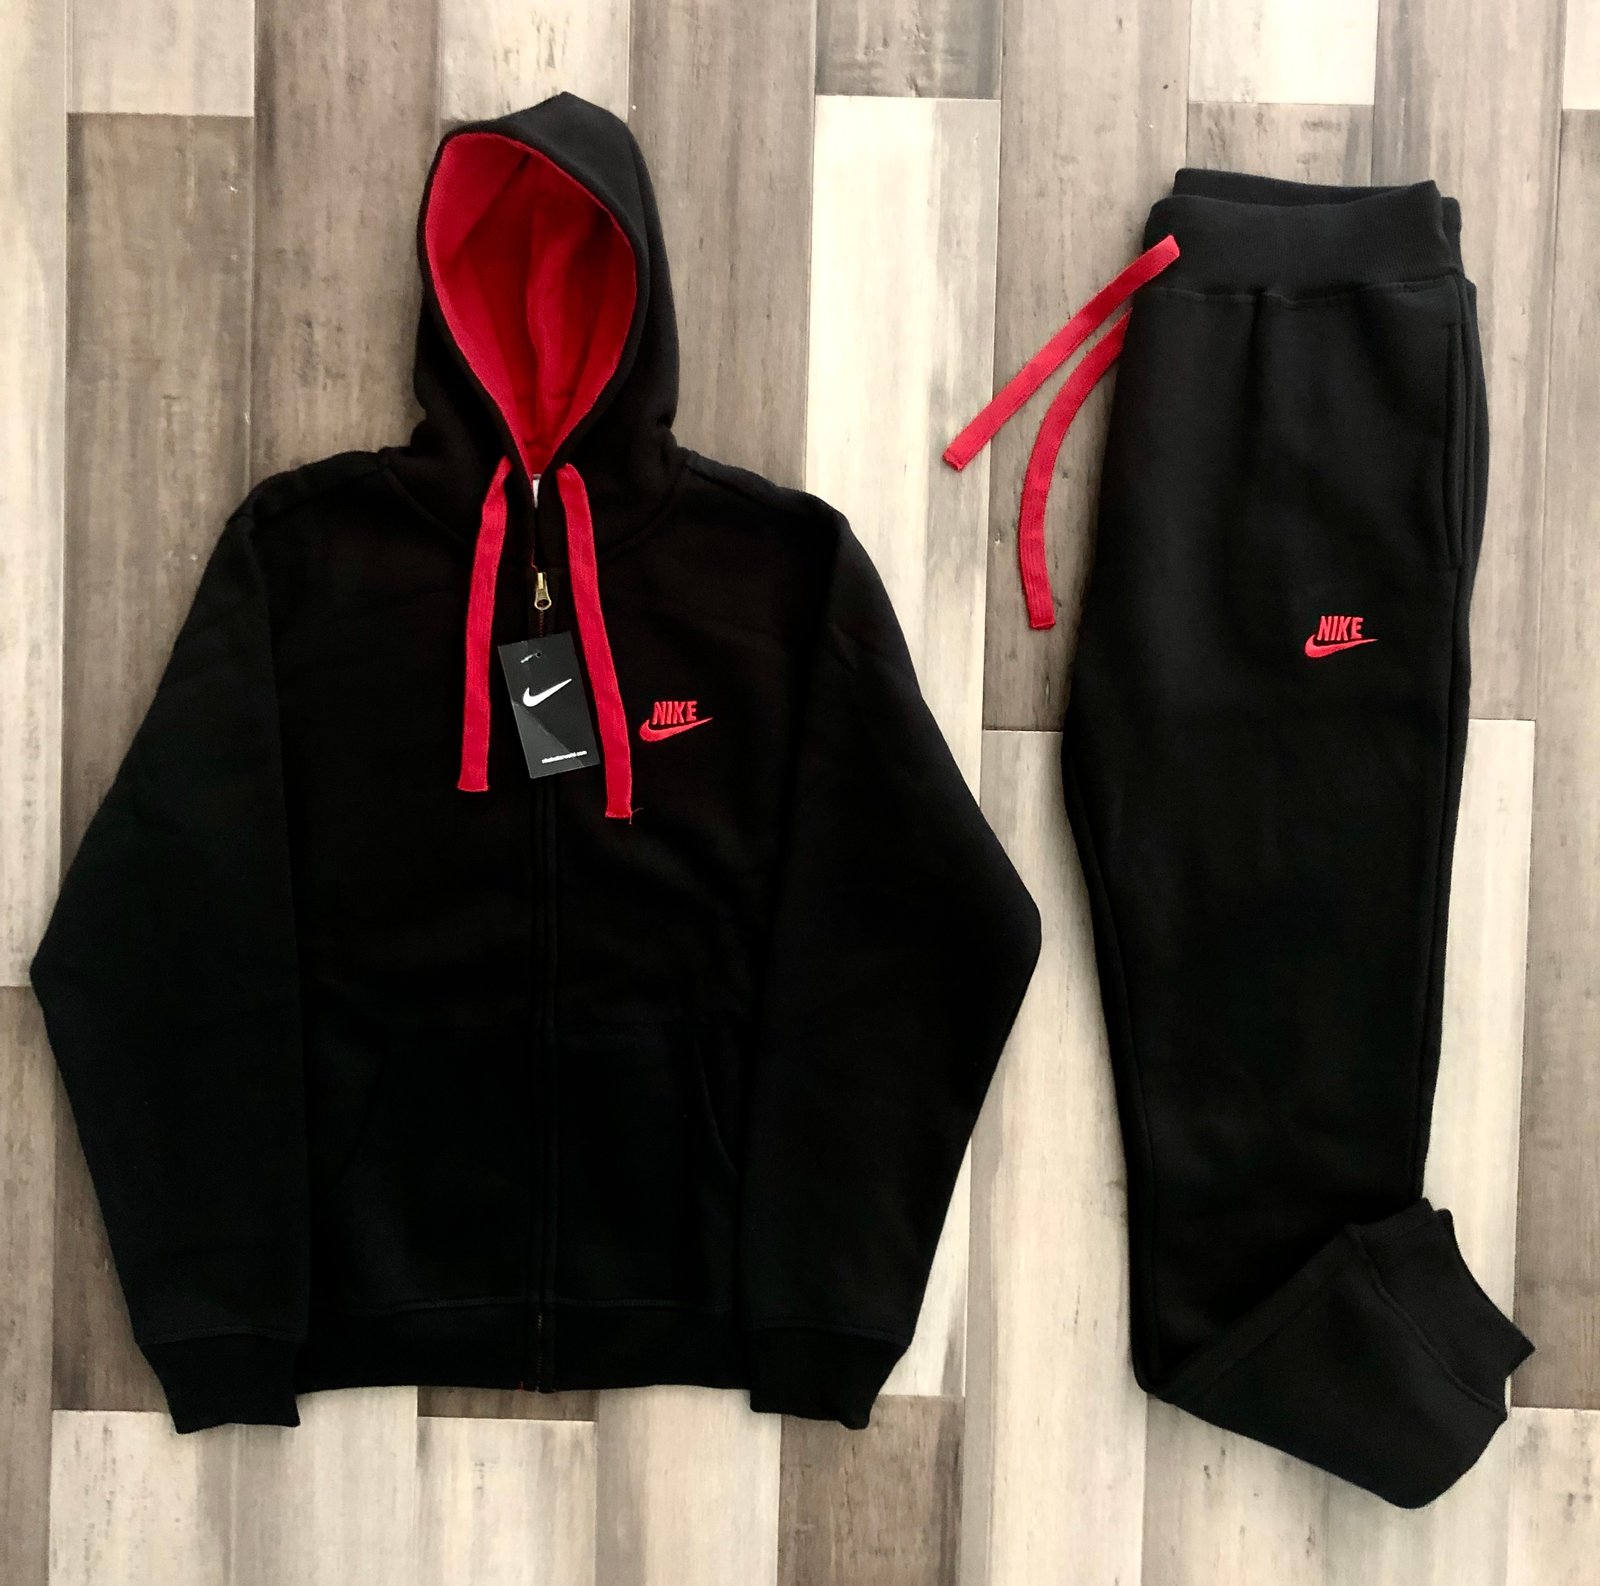 red and black nike zip up